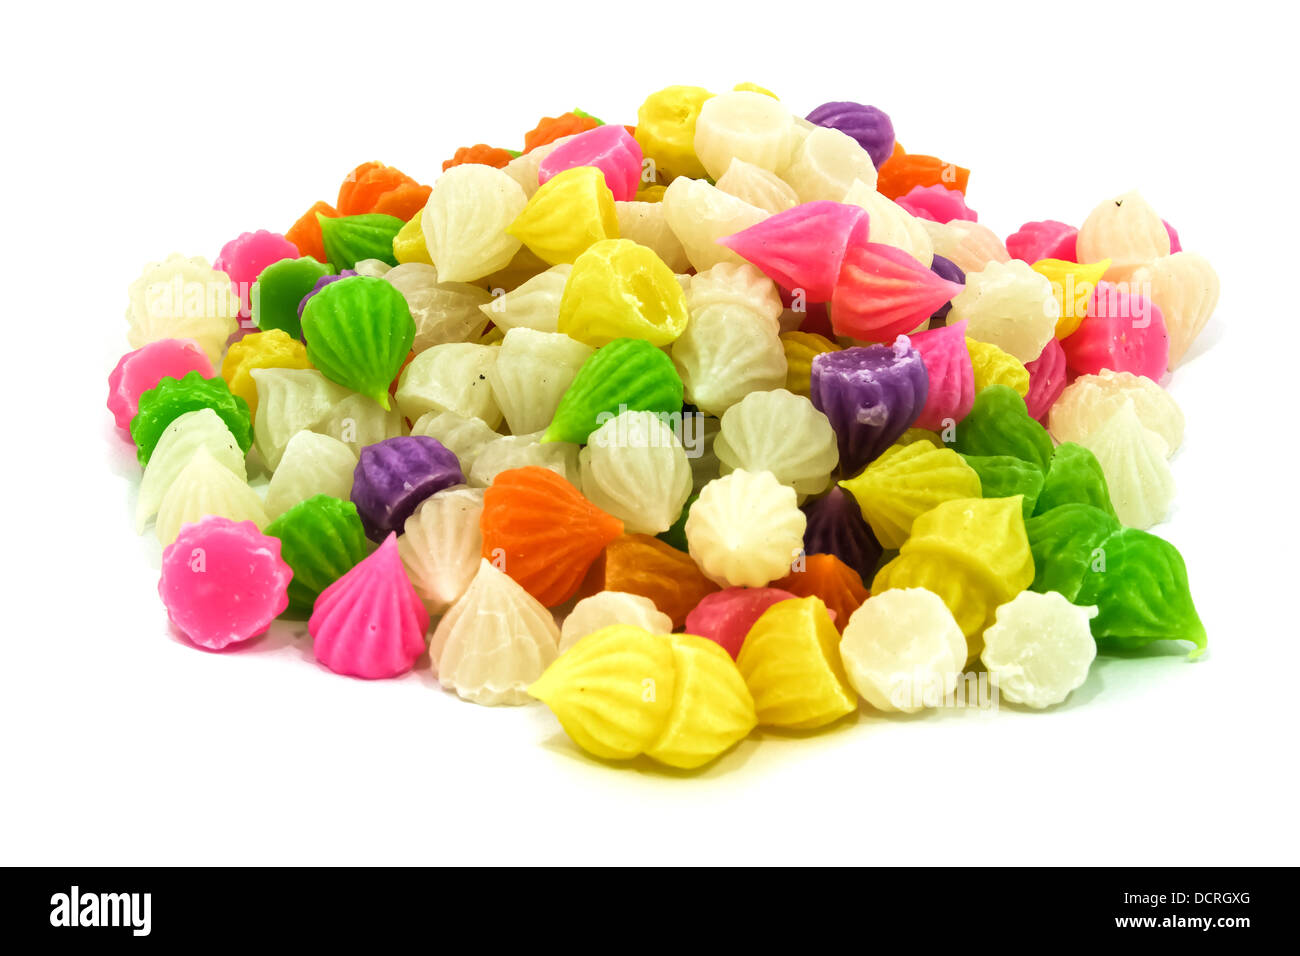 Aalaw candy is A dessert Thai. Stock Photo